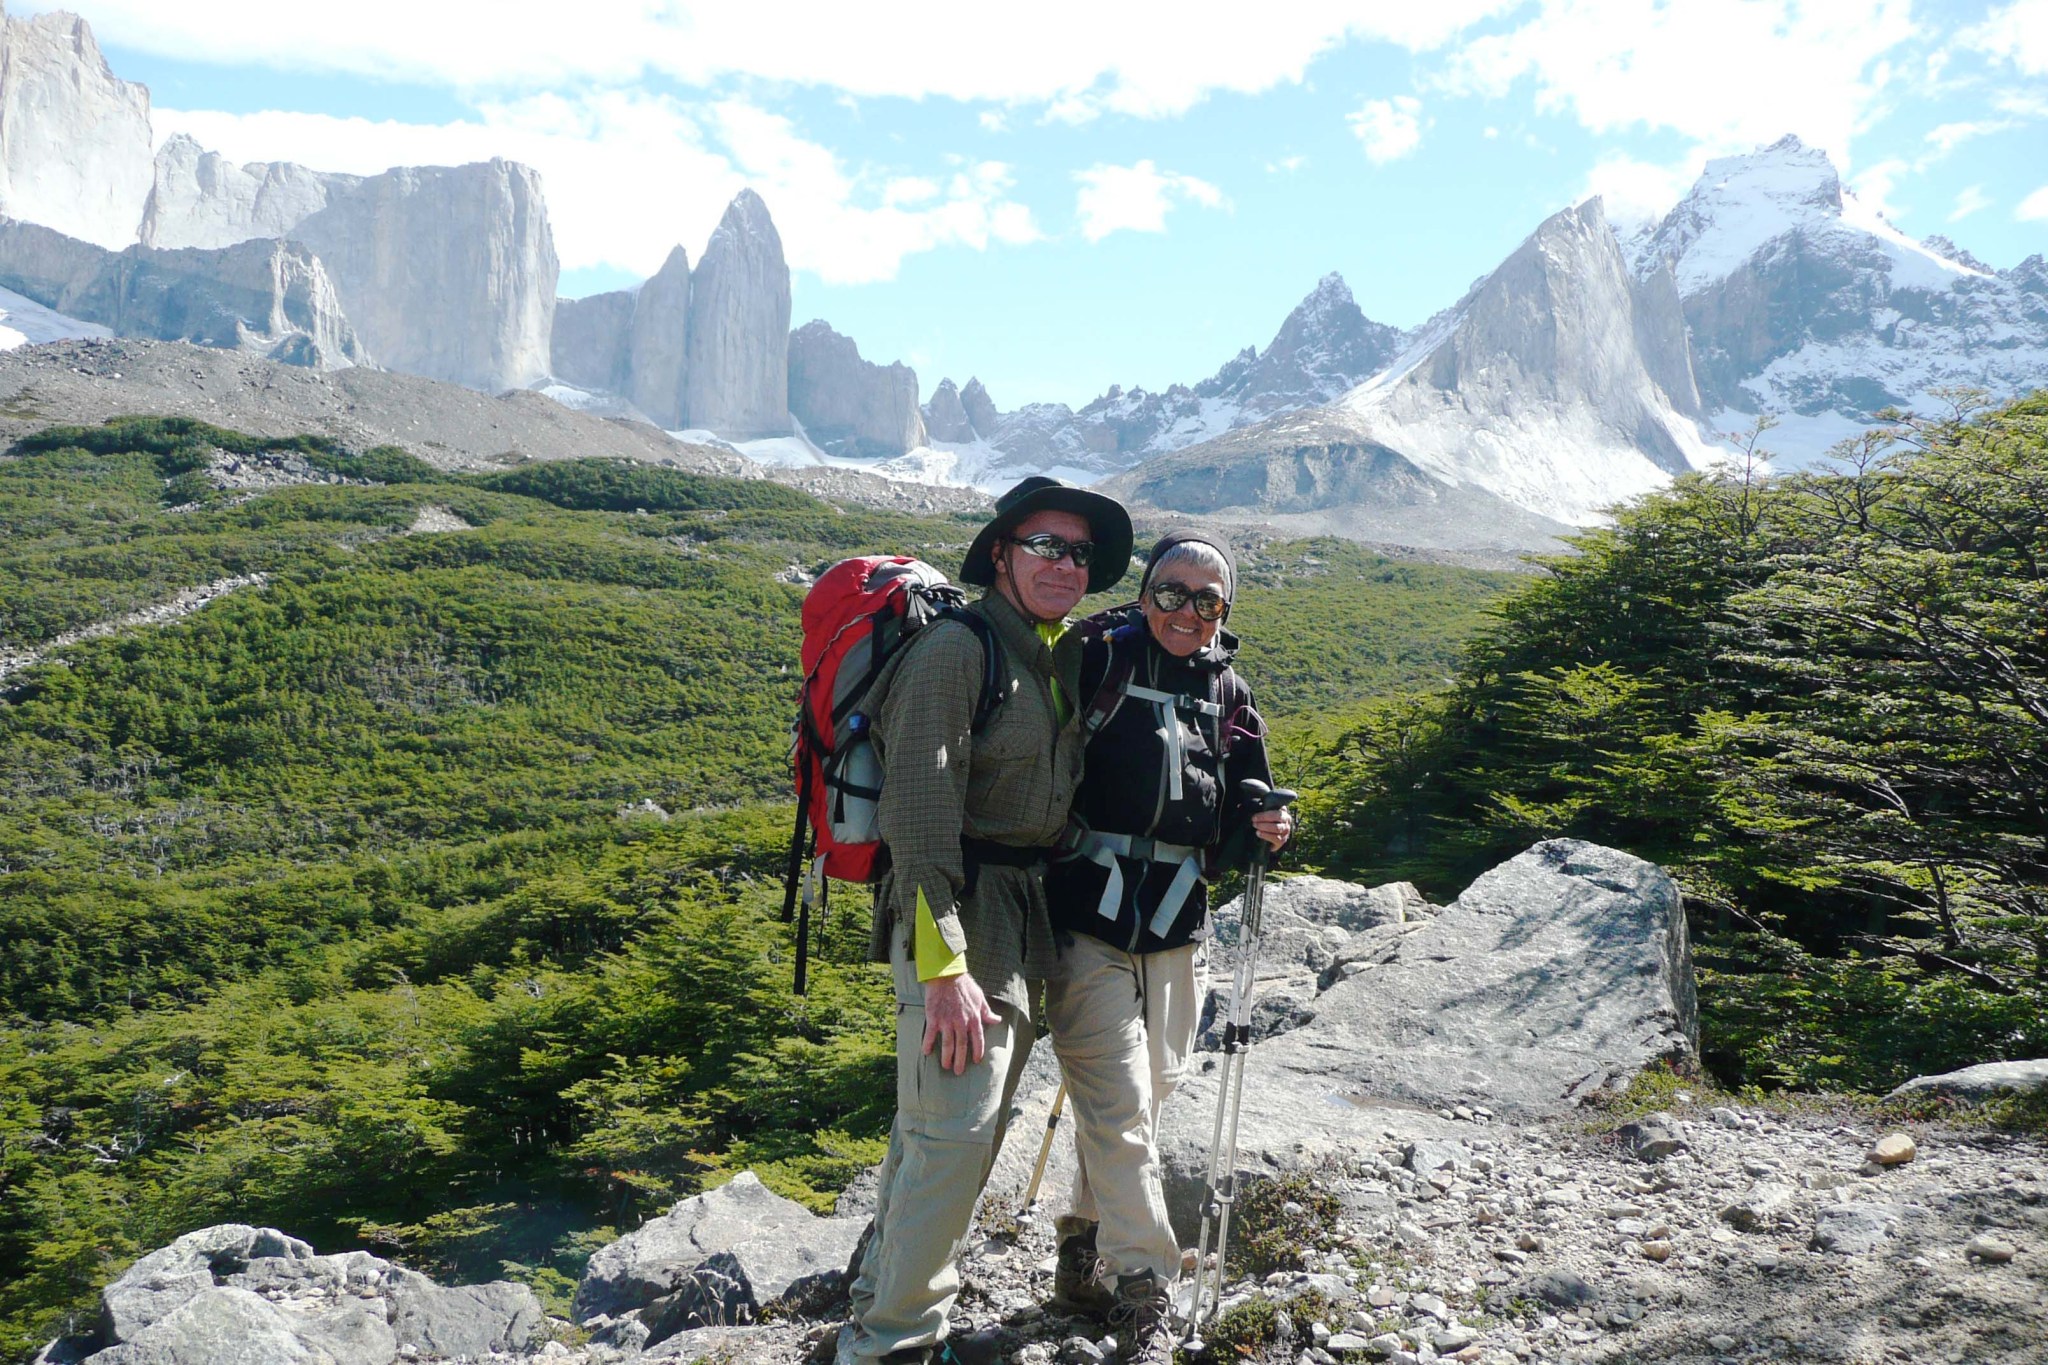 Man and woman in hiking clothes, hats, and backpacks, hold hiking poles and pose for a photo on a trail with mountains and greenery behind them. 